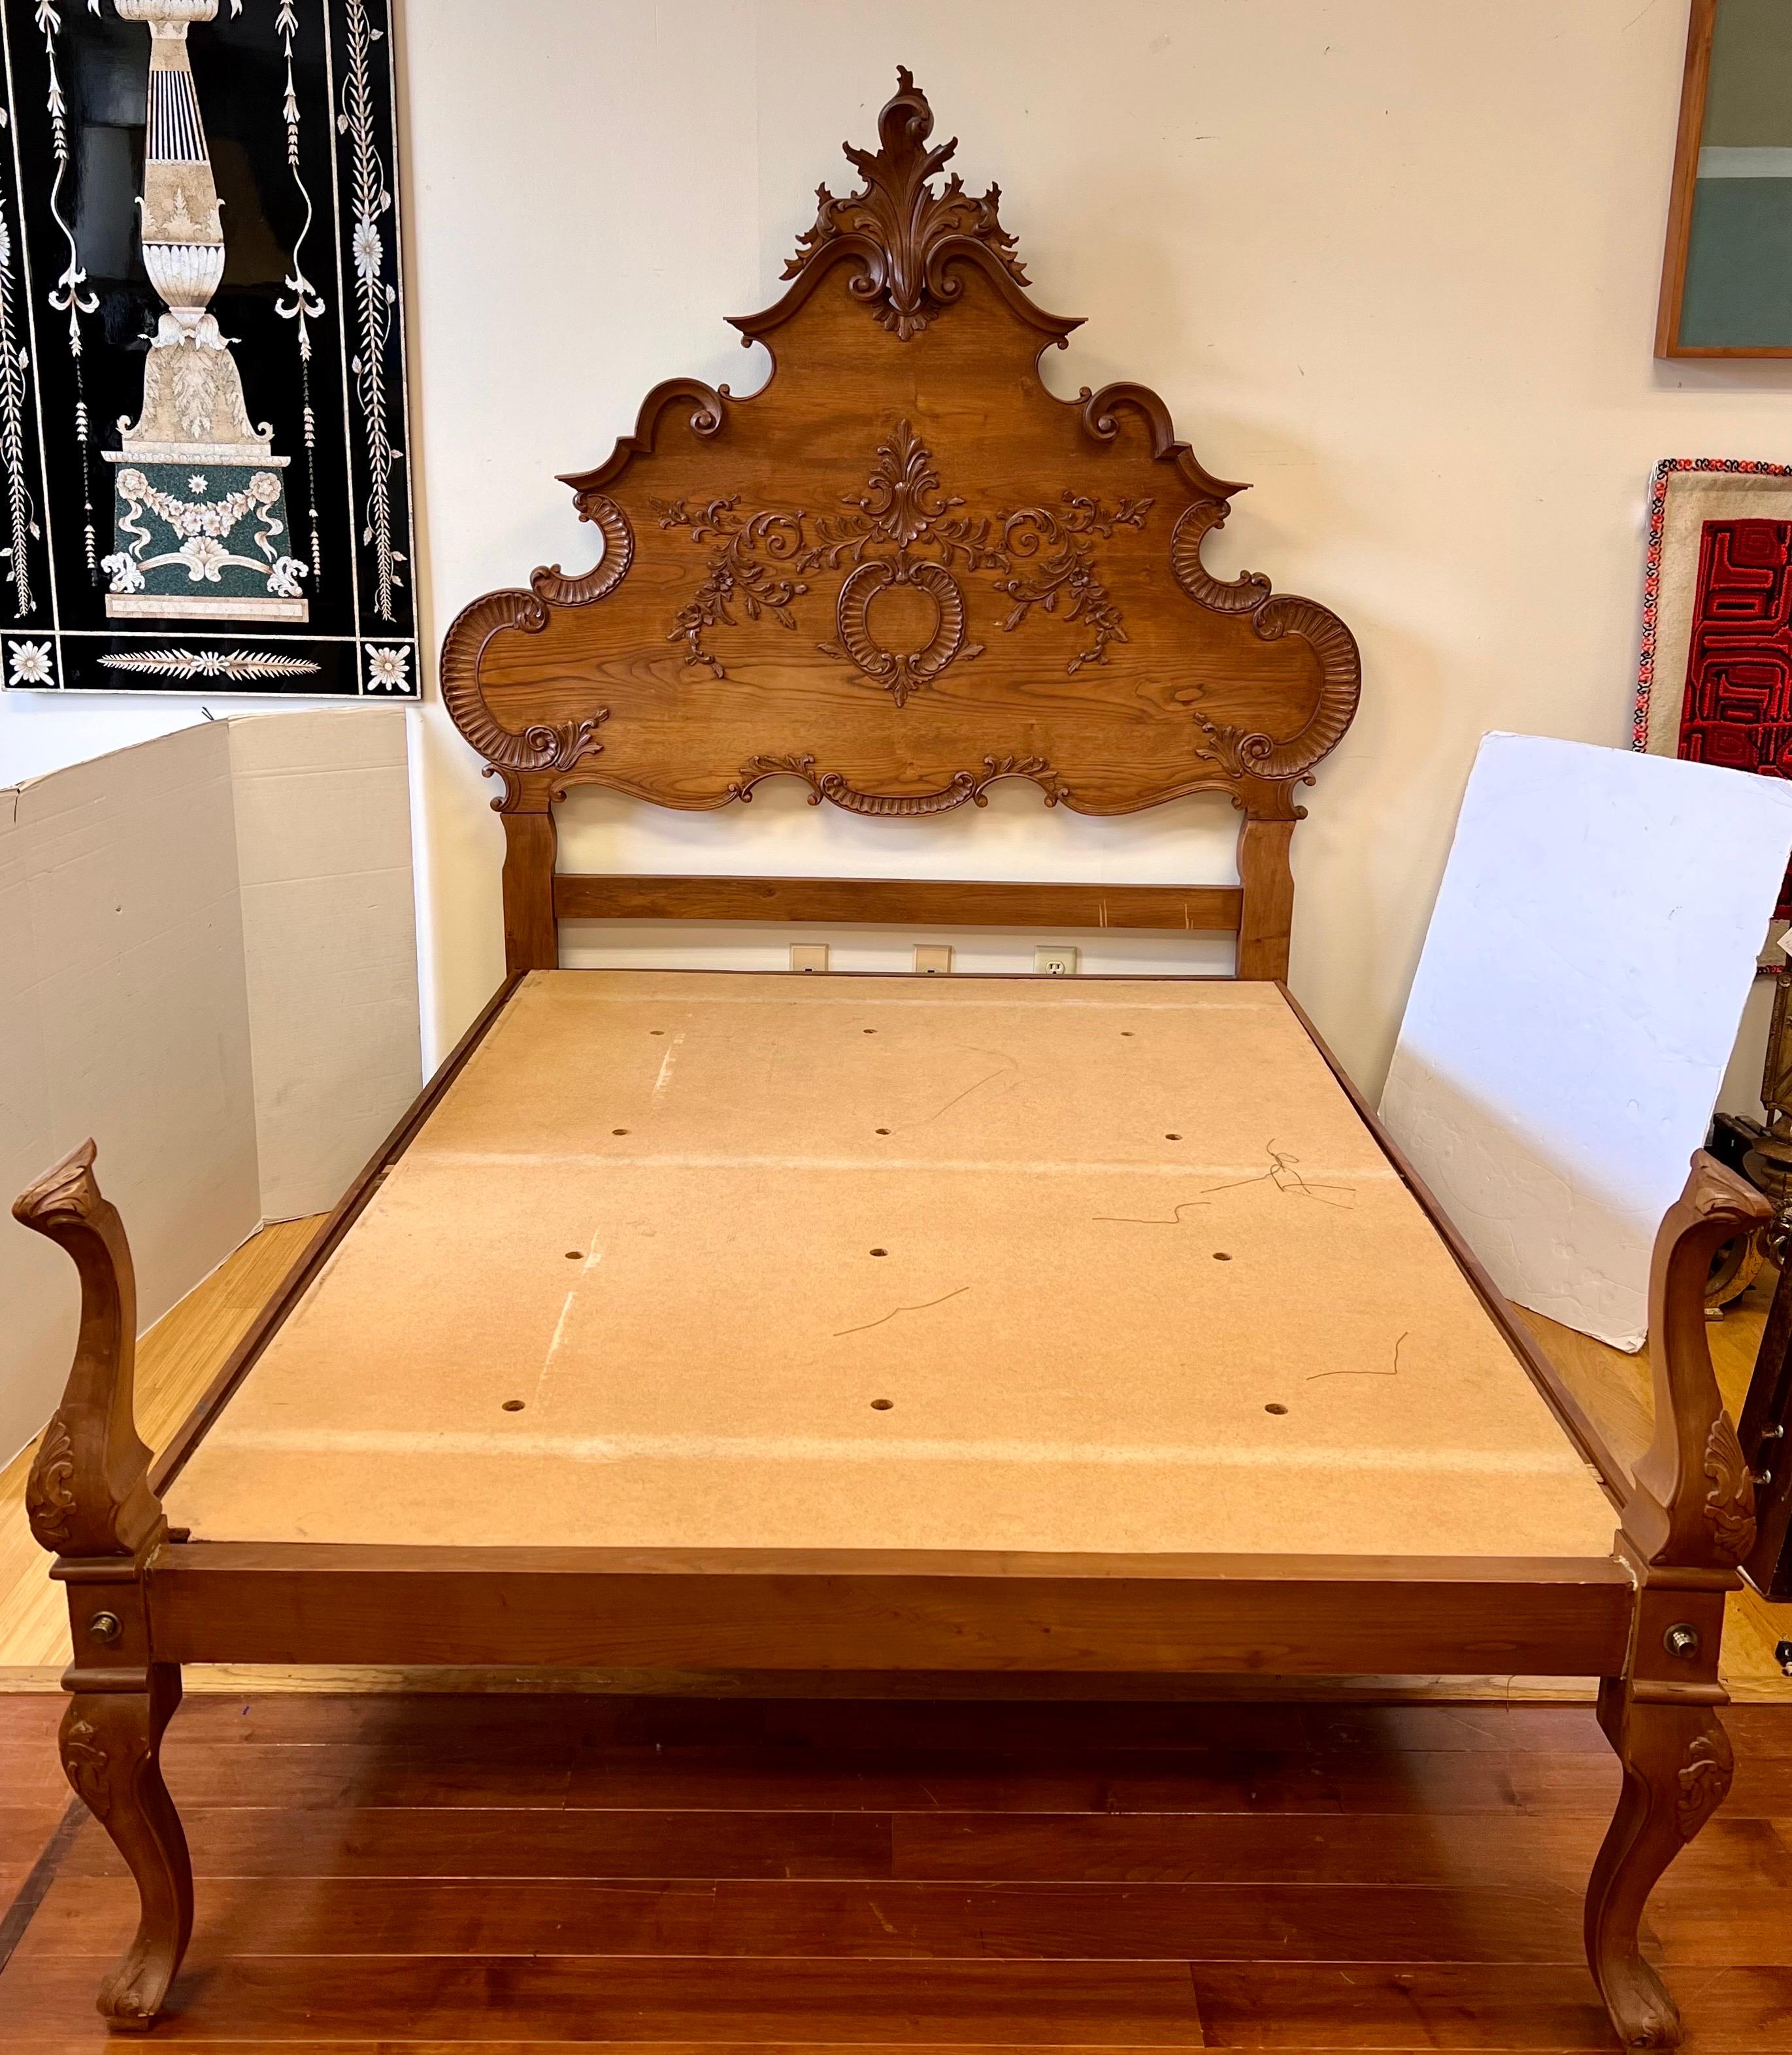 Stunning antique French Louis XVI style burled FULL size bed with ornate carvings. 
Solid and sturdy, with minor cosmetic imperfections consistent with age. Includes headboard, footboard, side rails, and platform support.
All dimensions are above